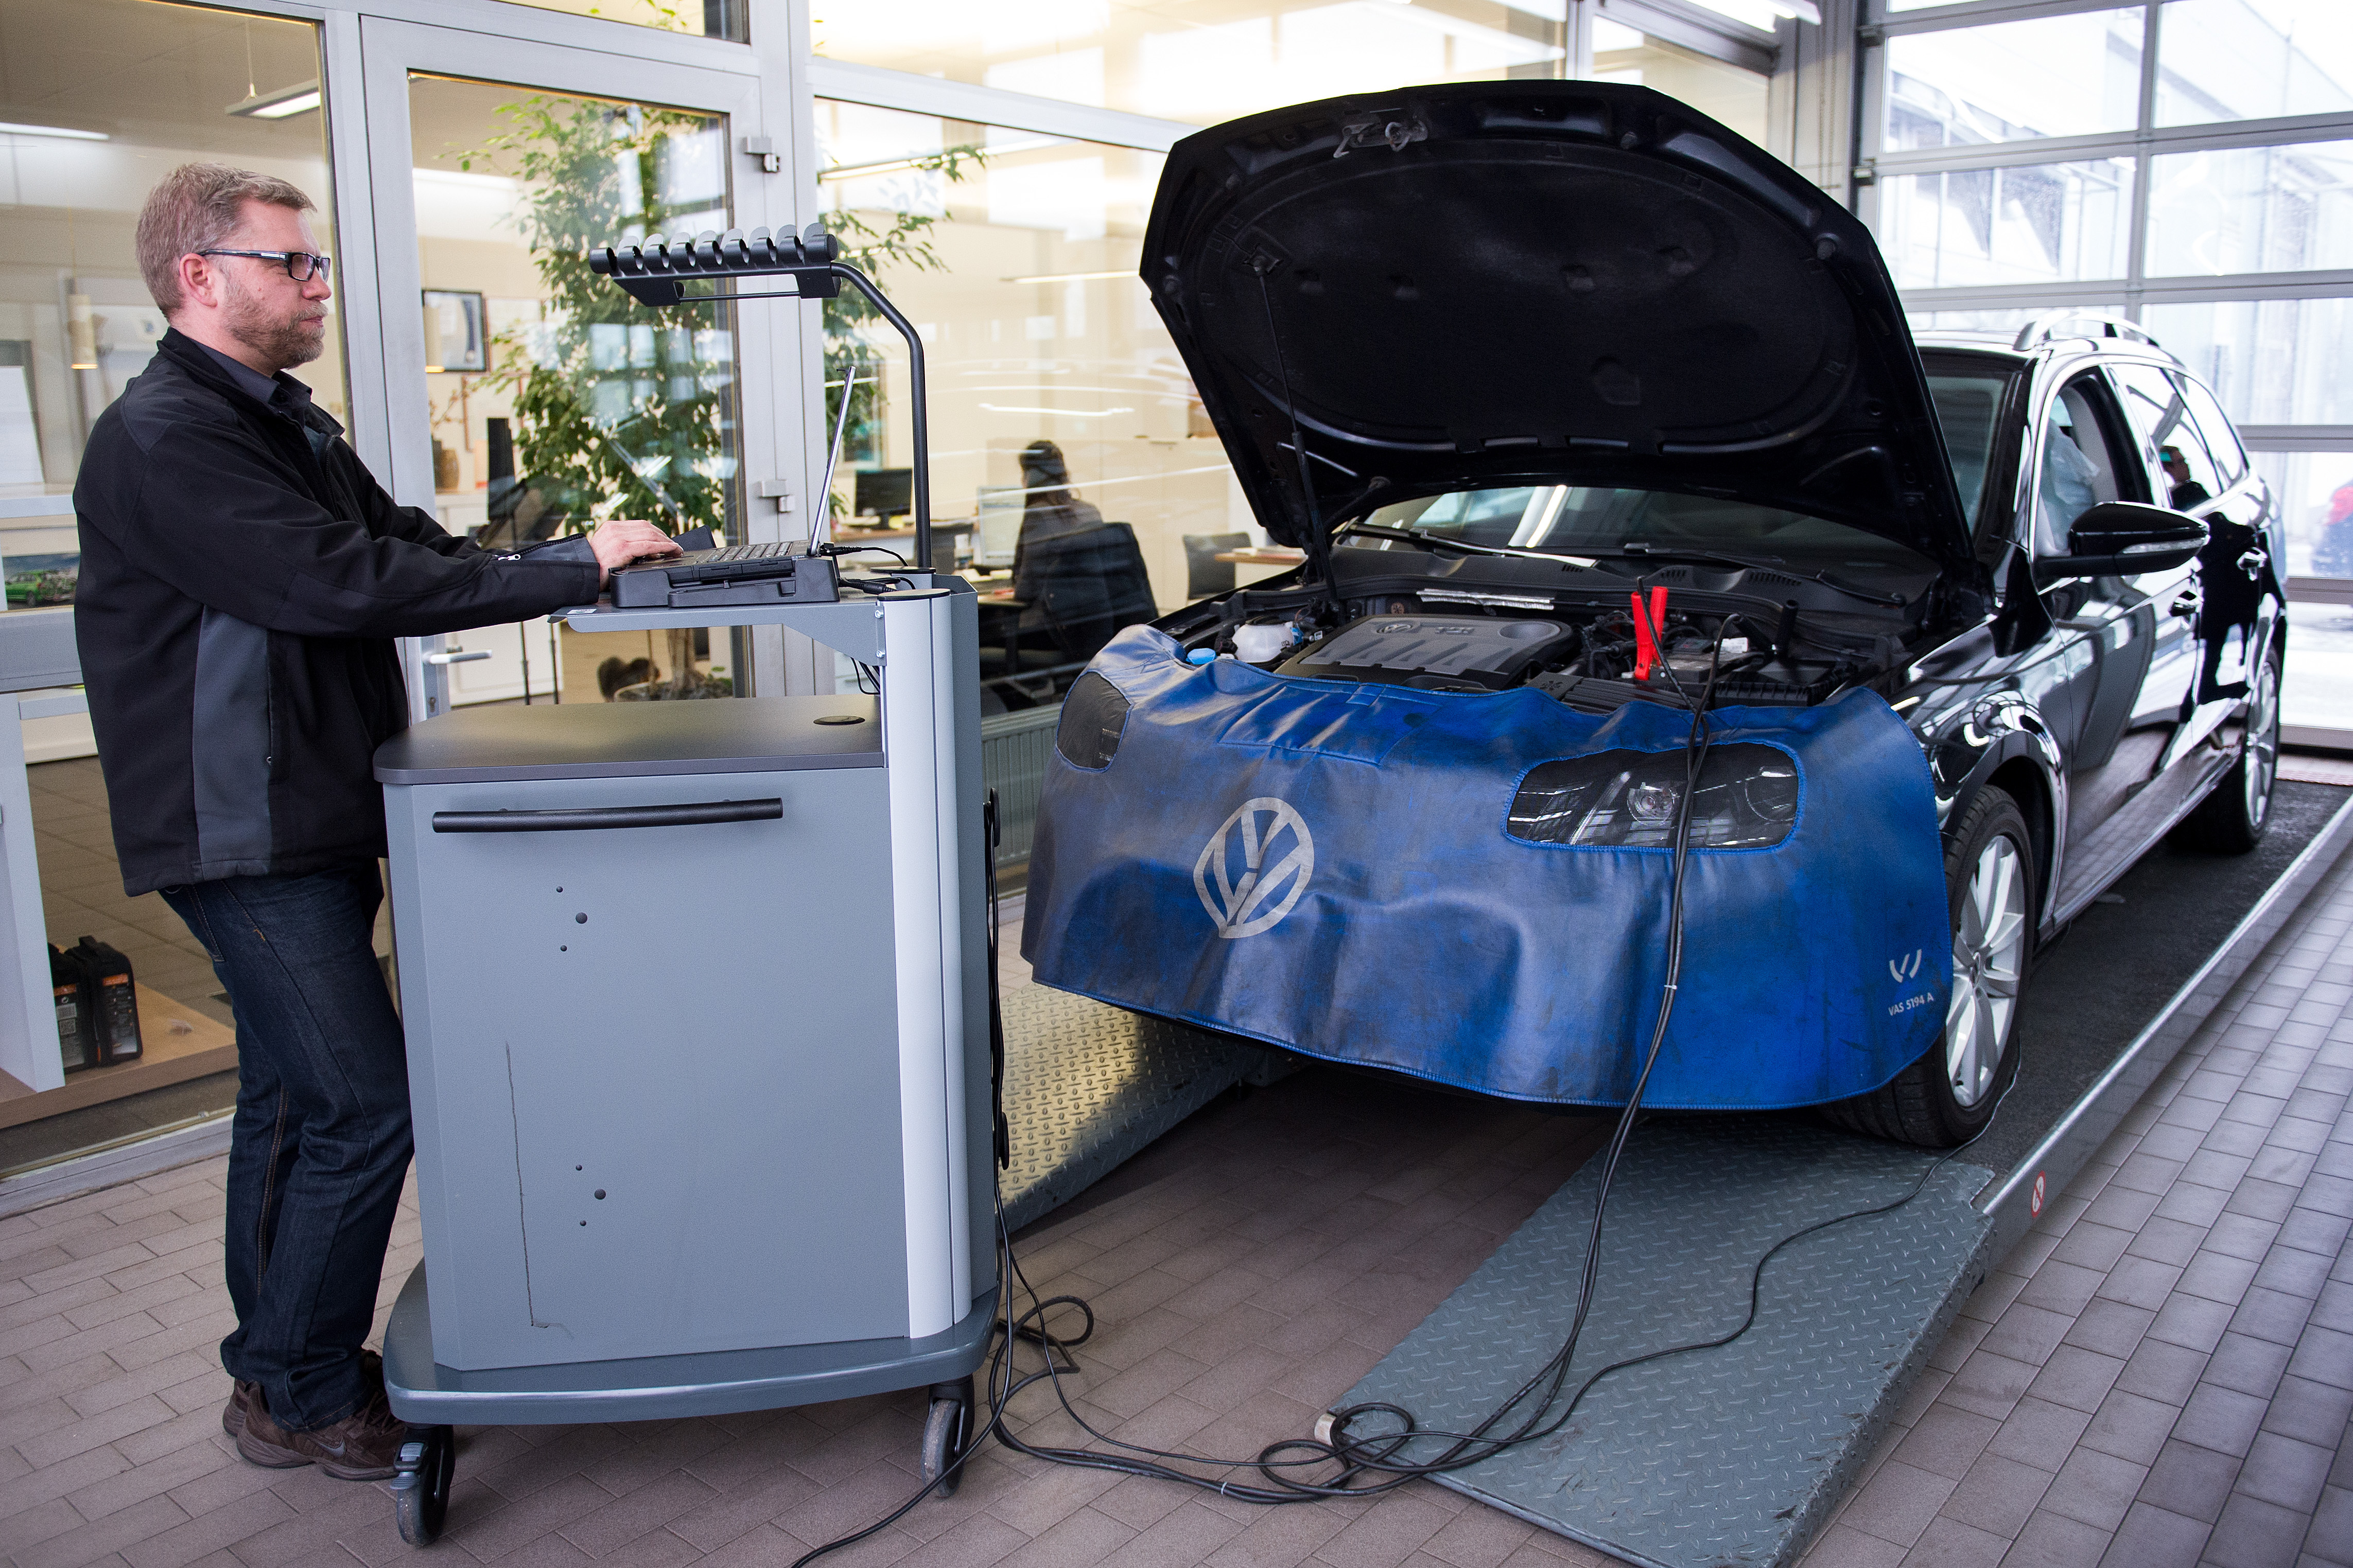 EMISSIONS. Marc Oliver Dahl, head of the repair shop of a Volkswagen (VW) dealer, runs a diagnosis program at a VW Passat TDI in Solingen, Germany on March 4, 2016. File photo by Marius Becker/EPA 